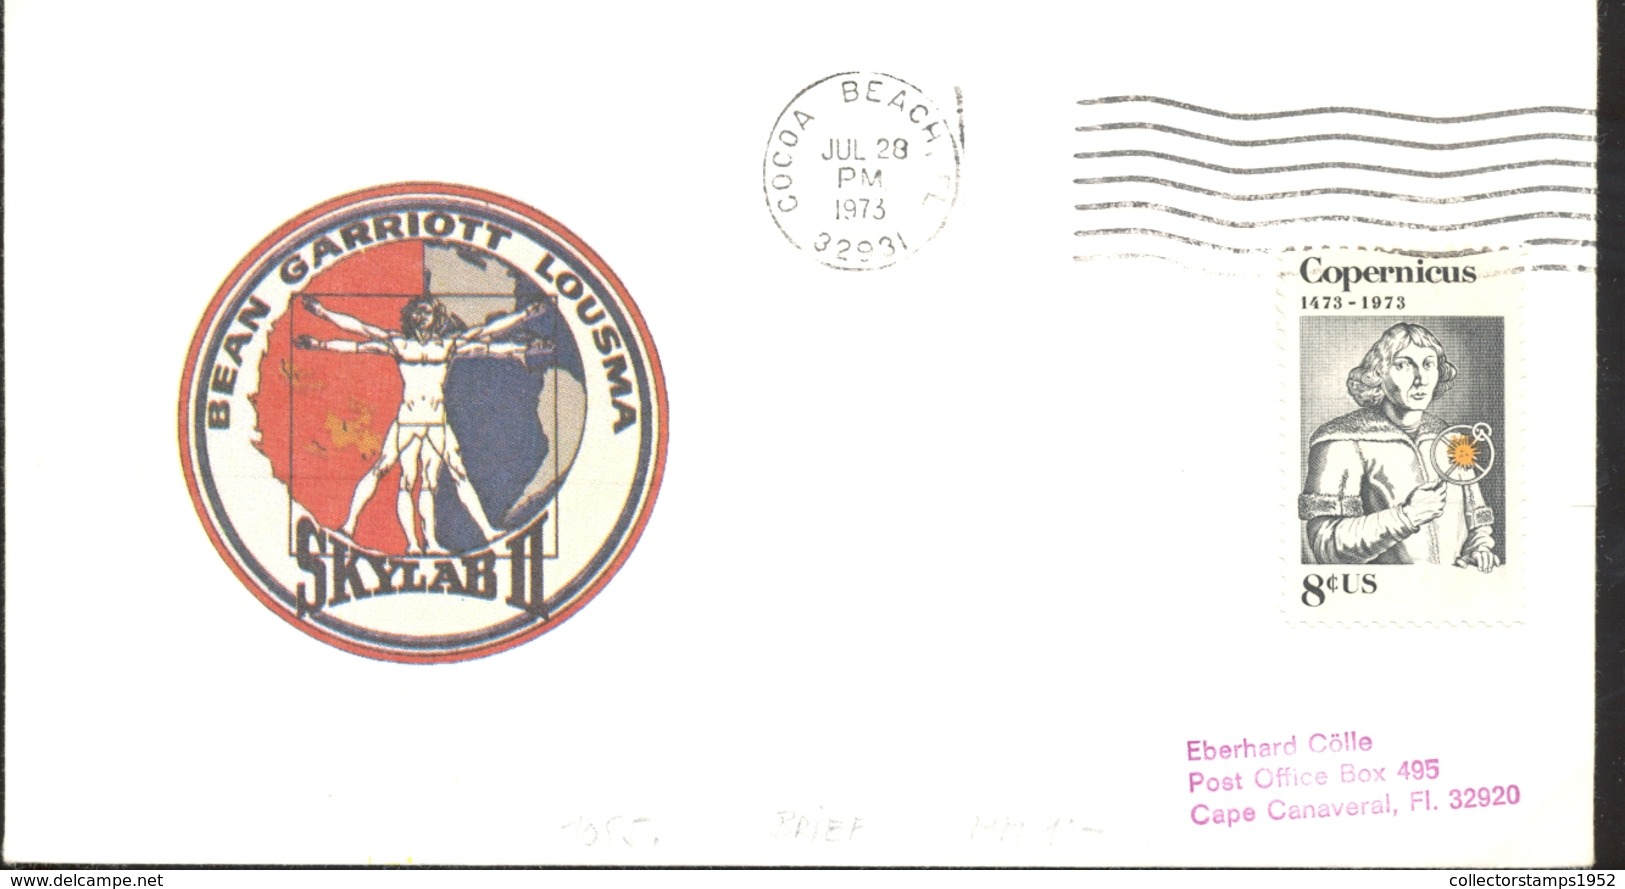 74337- SKYLAB-2 MISSION, SPACECRAFT, COSMOS, SPACE, SPECIAL COVER, COPERNICUS STAMP, 1973, USA - North  America